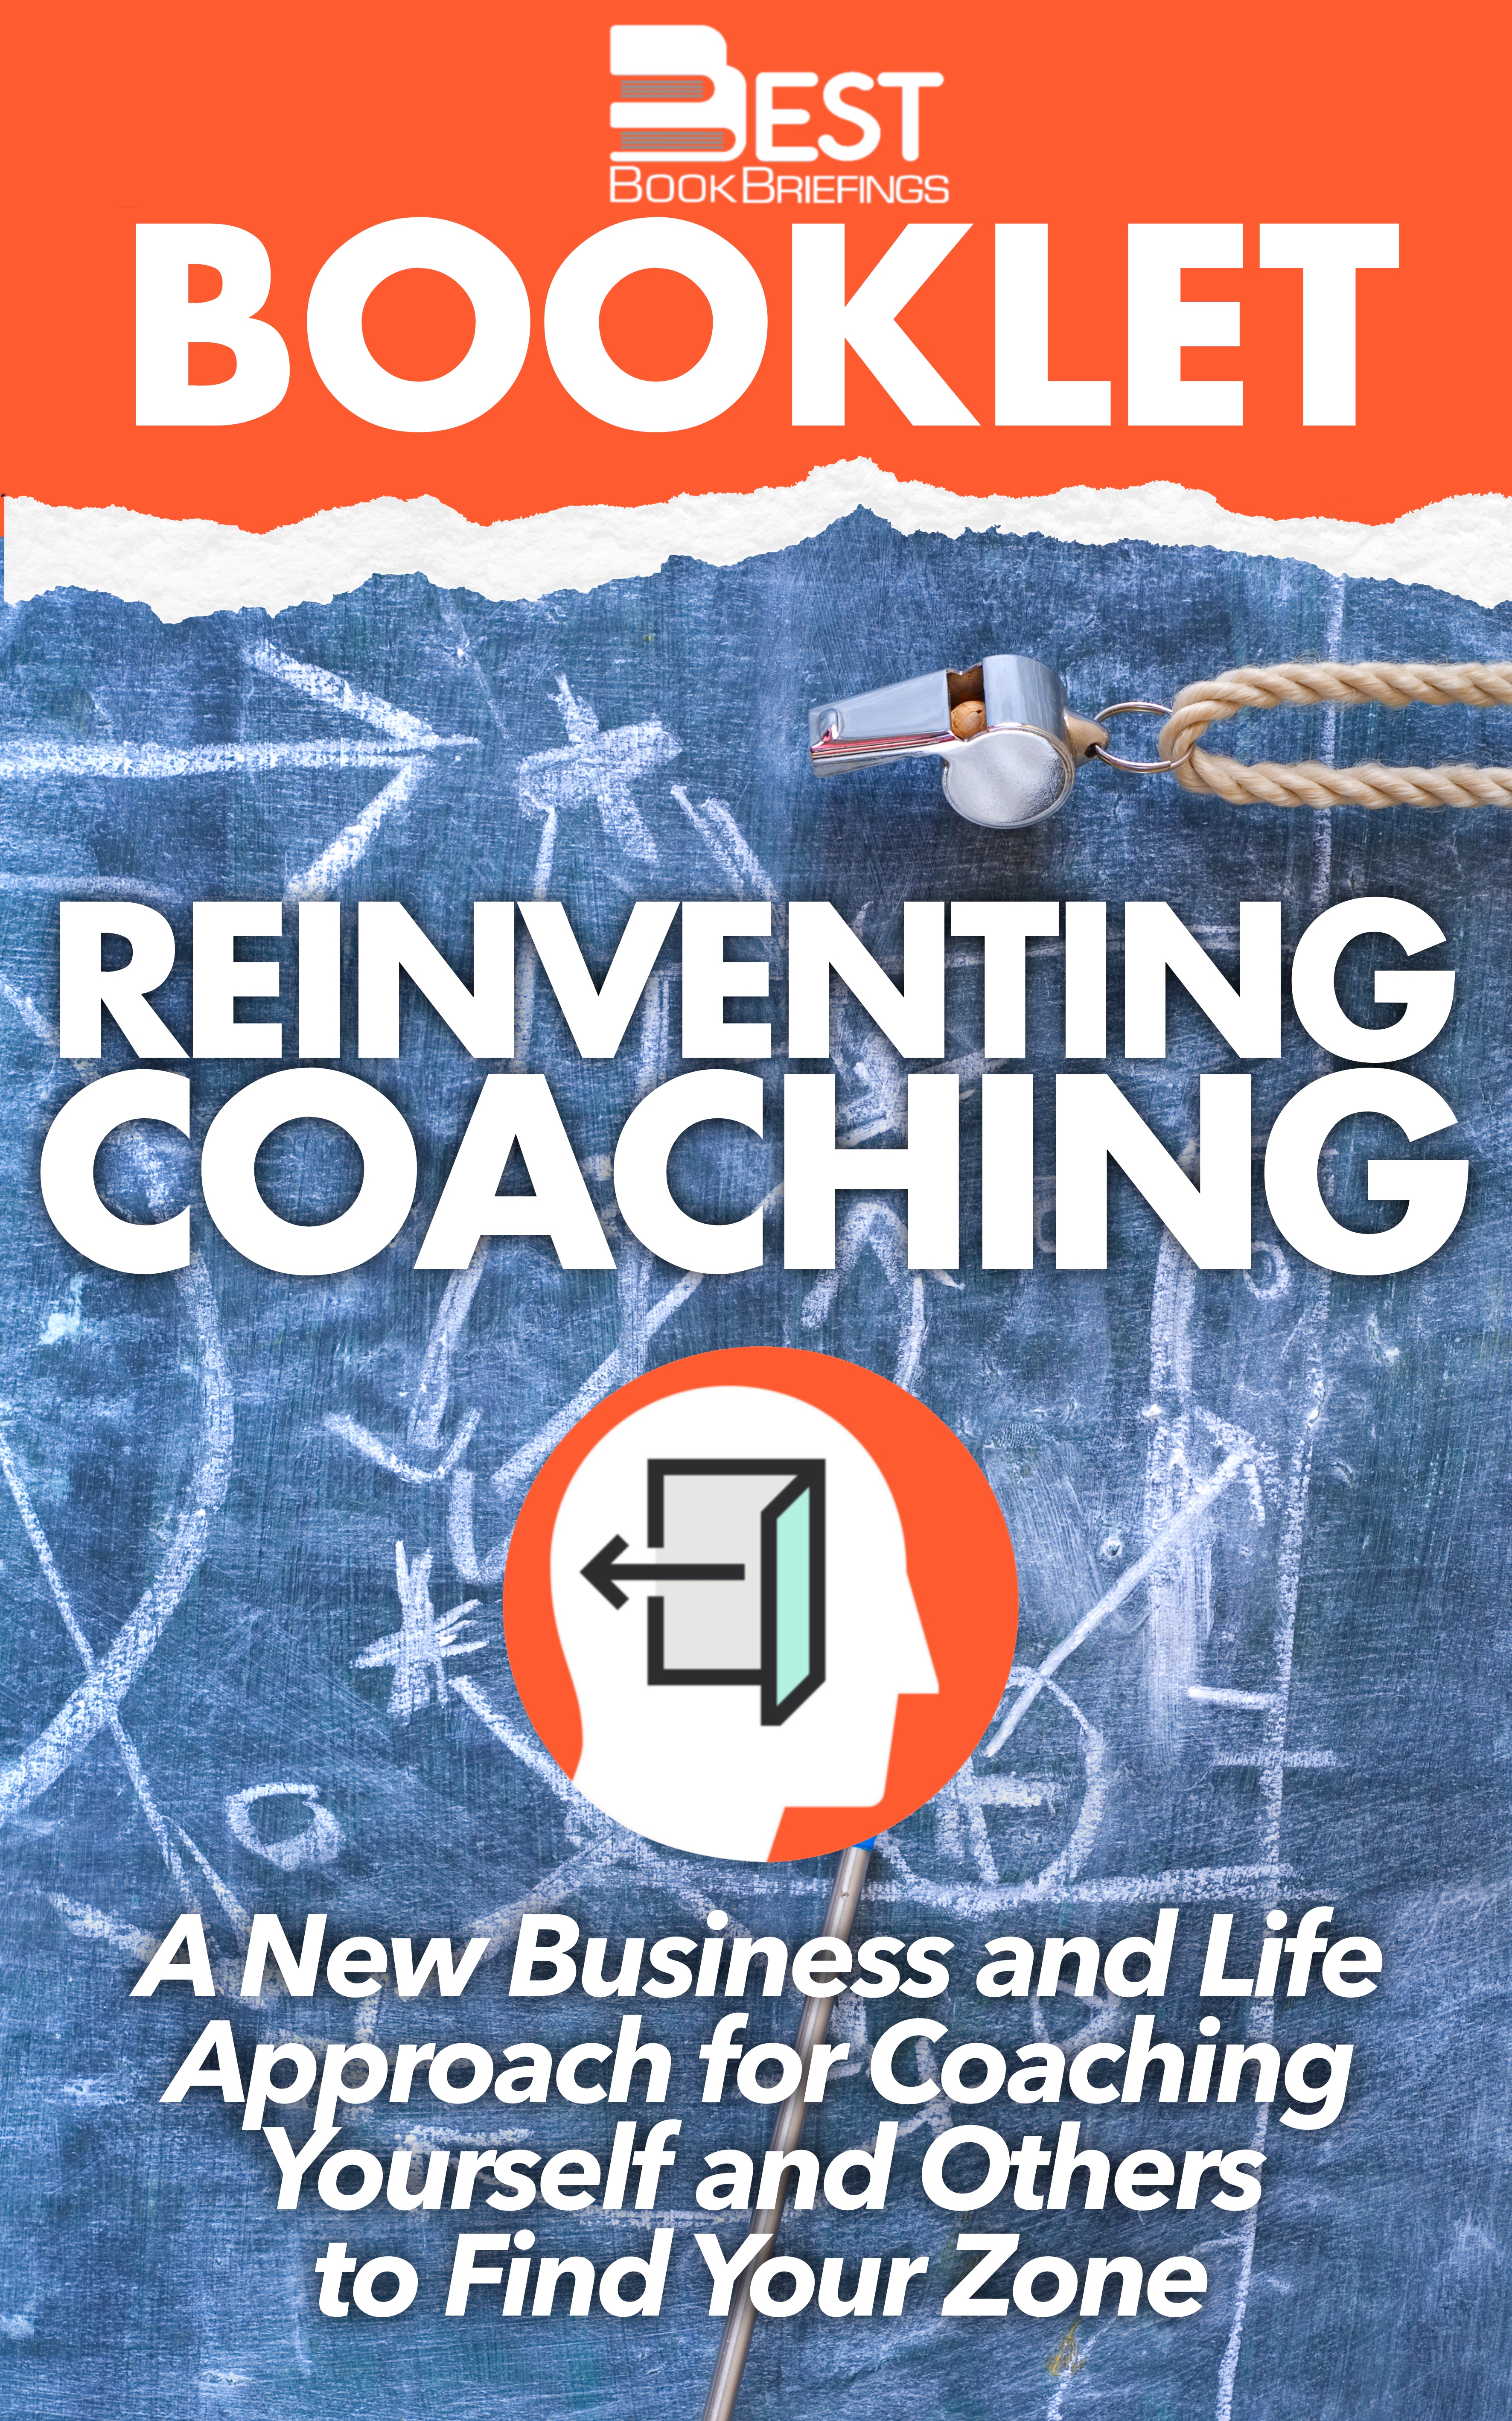 Reinventing Coaching presents Coring, a new model that takes traditional coaching to a new level. A new approach aimed to help you find and be in your zone. Coring proves you are valuable; but unless you’re in the right place, your worth will remain hidden and unacknowledged. It’s not a book meant to be 